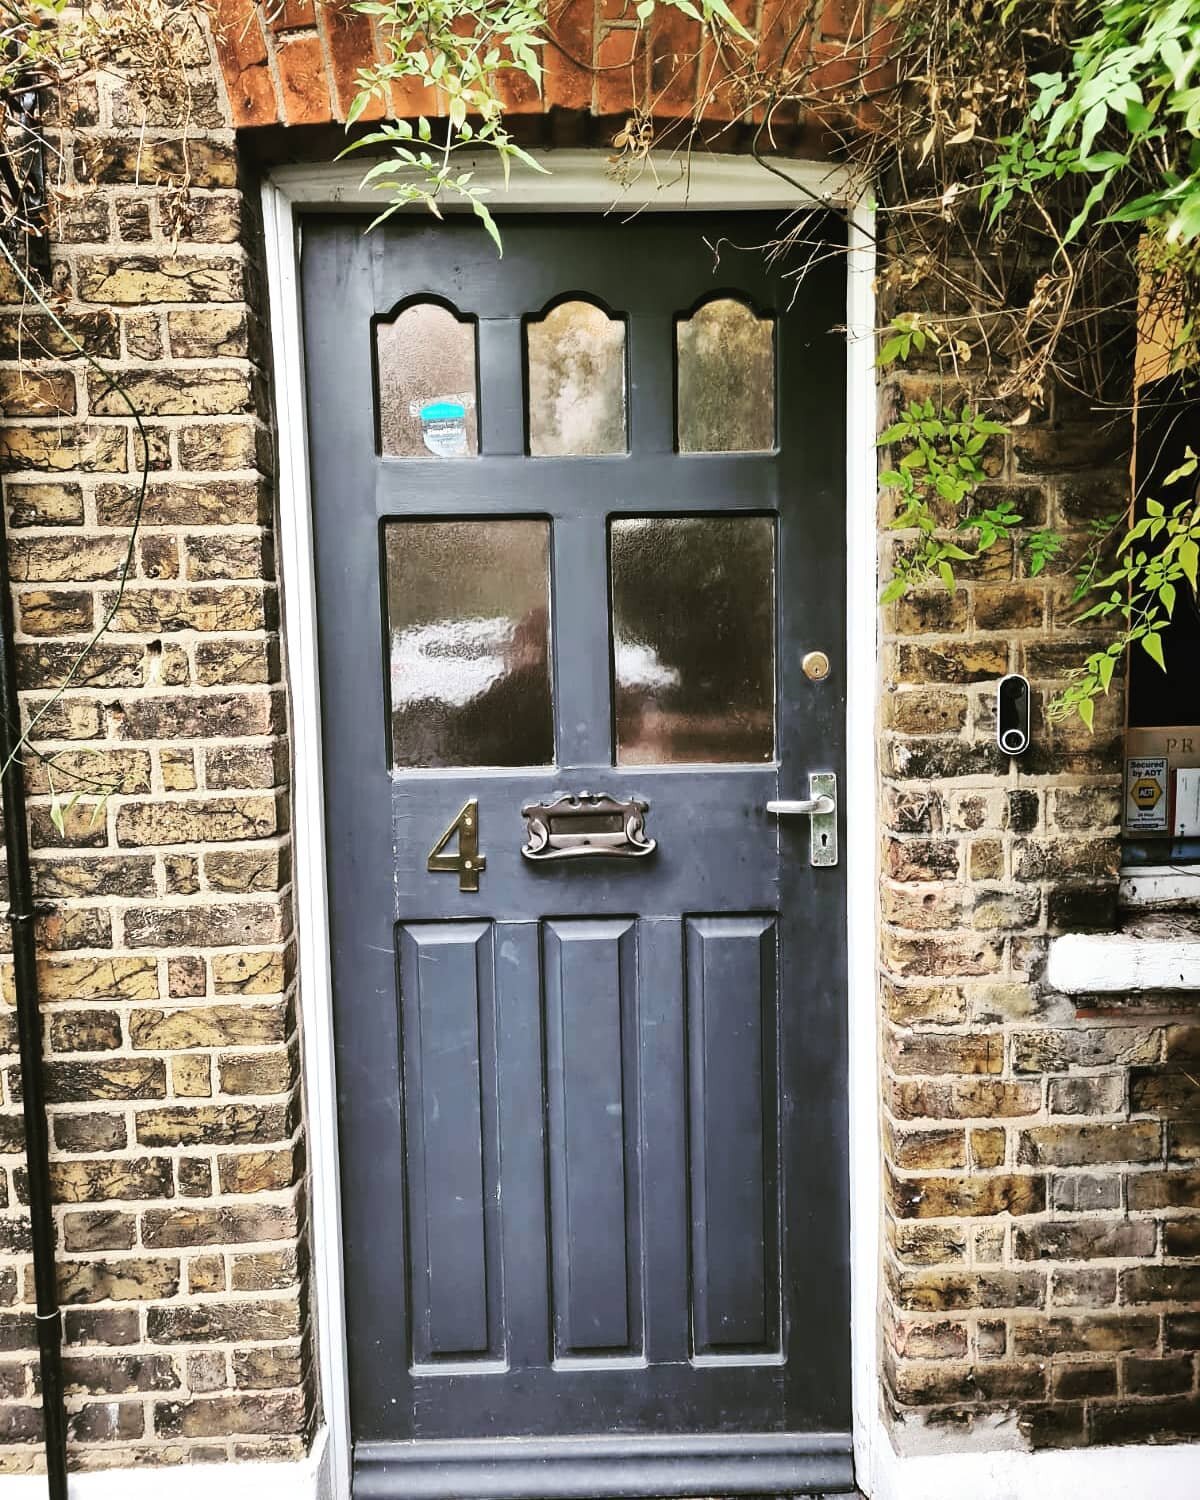 Another Nest Hello Installation, adding the finishing touch to any entrance. They suit any type of front door whether it's traditional or modern. 
@googlenest 
#googlenestinstallations #nesthello #videodoorbell #homesecurity #homeimprovements #niceic